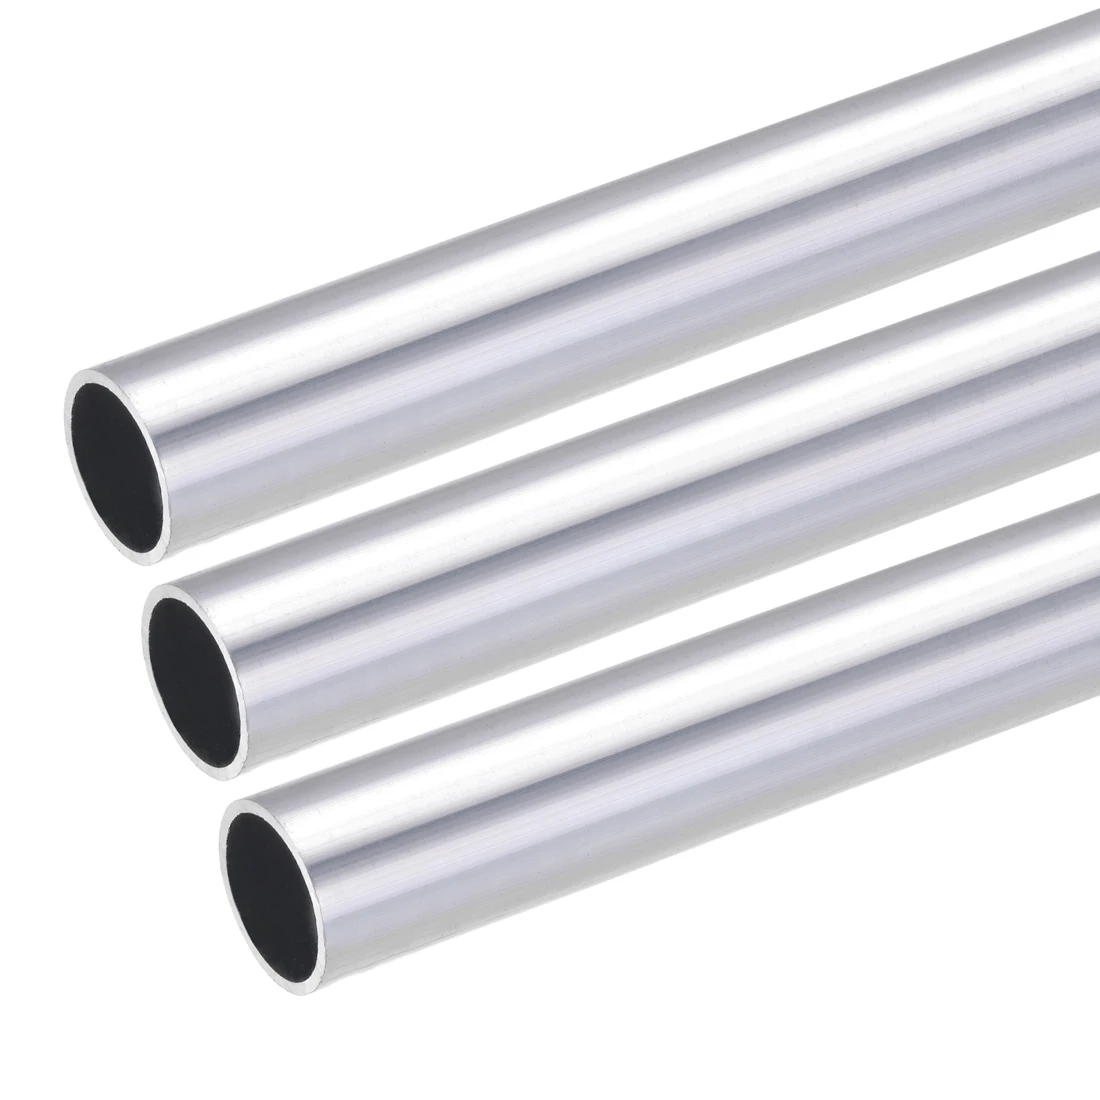 Details about   Aluminium alloy round hollow Bar Pipe Rod 300mm Length tubing 14 Diameters 